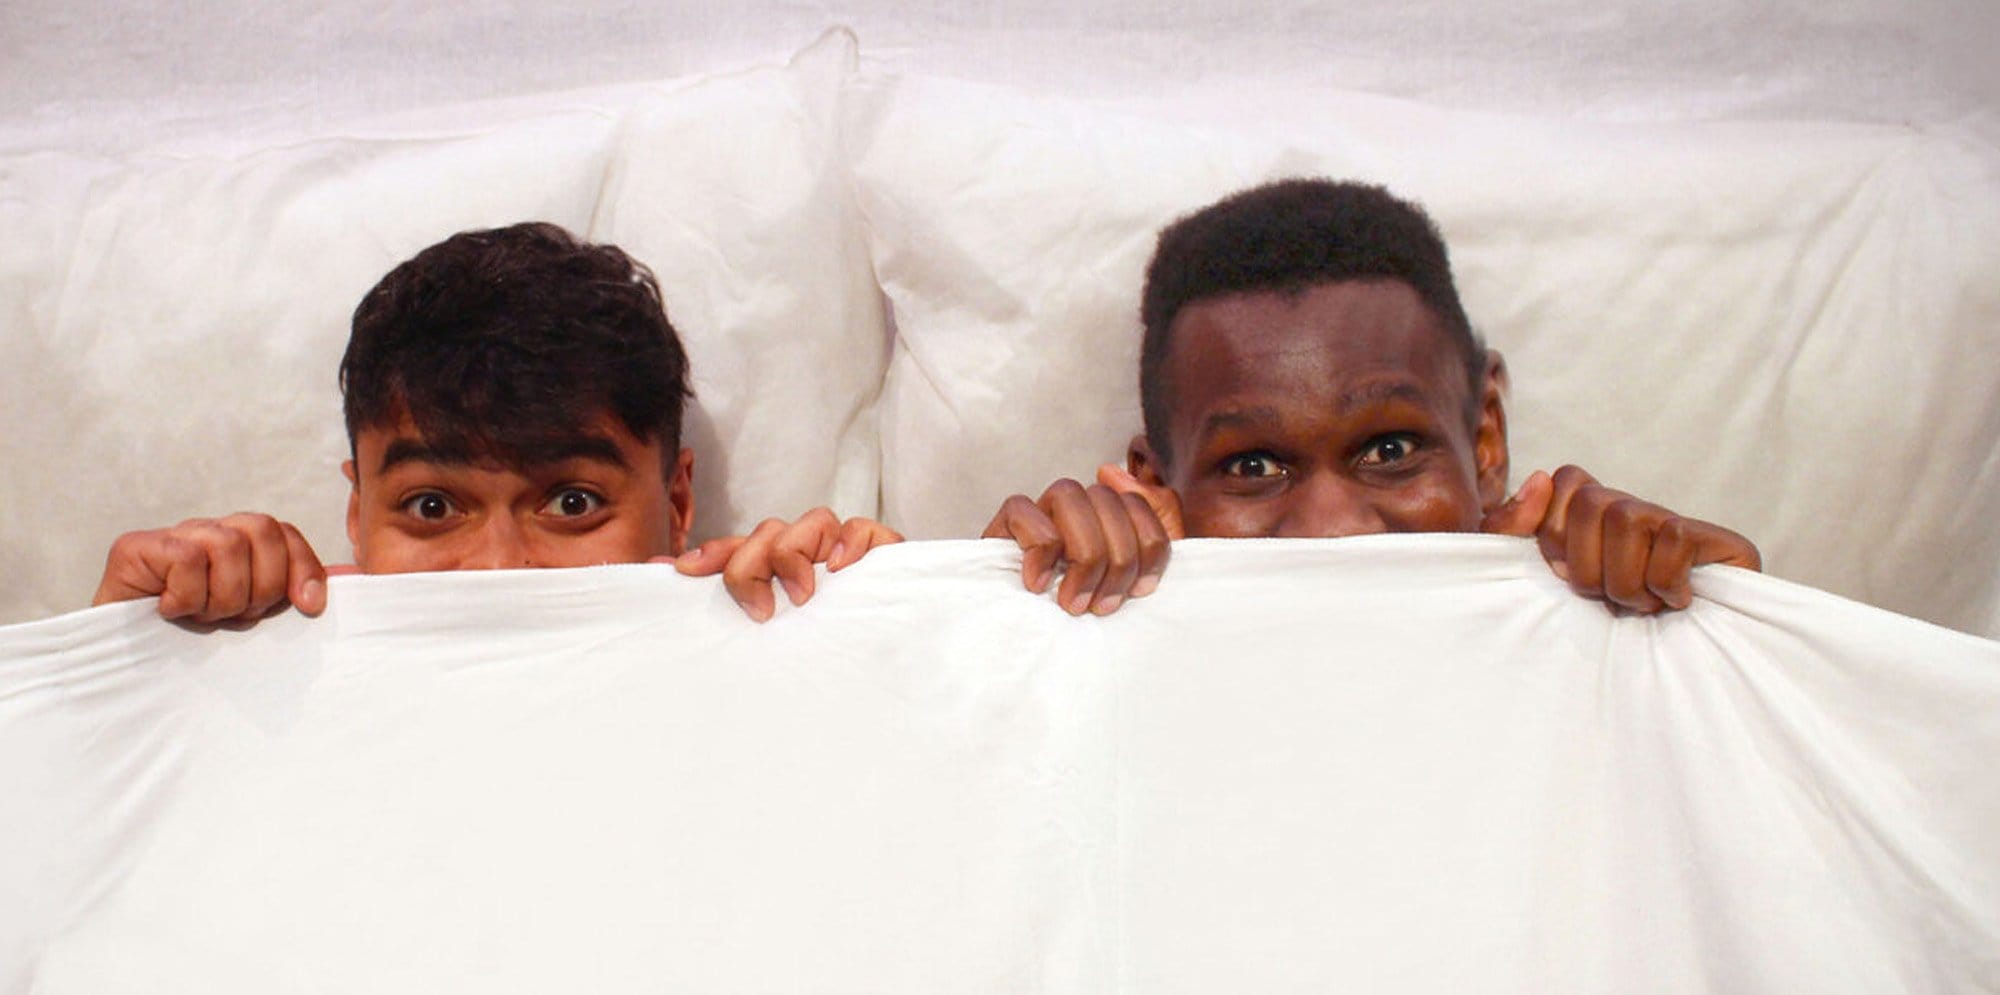 Two performers peek out from underneath the pillows and sheets with excited expressions.